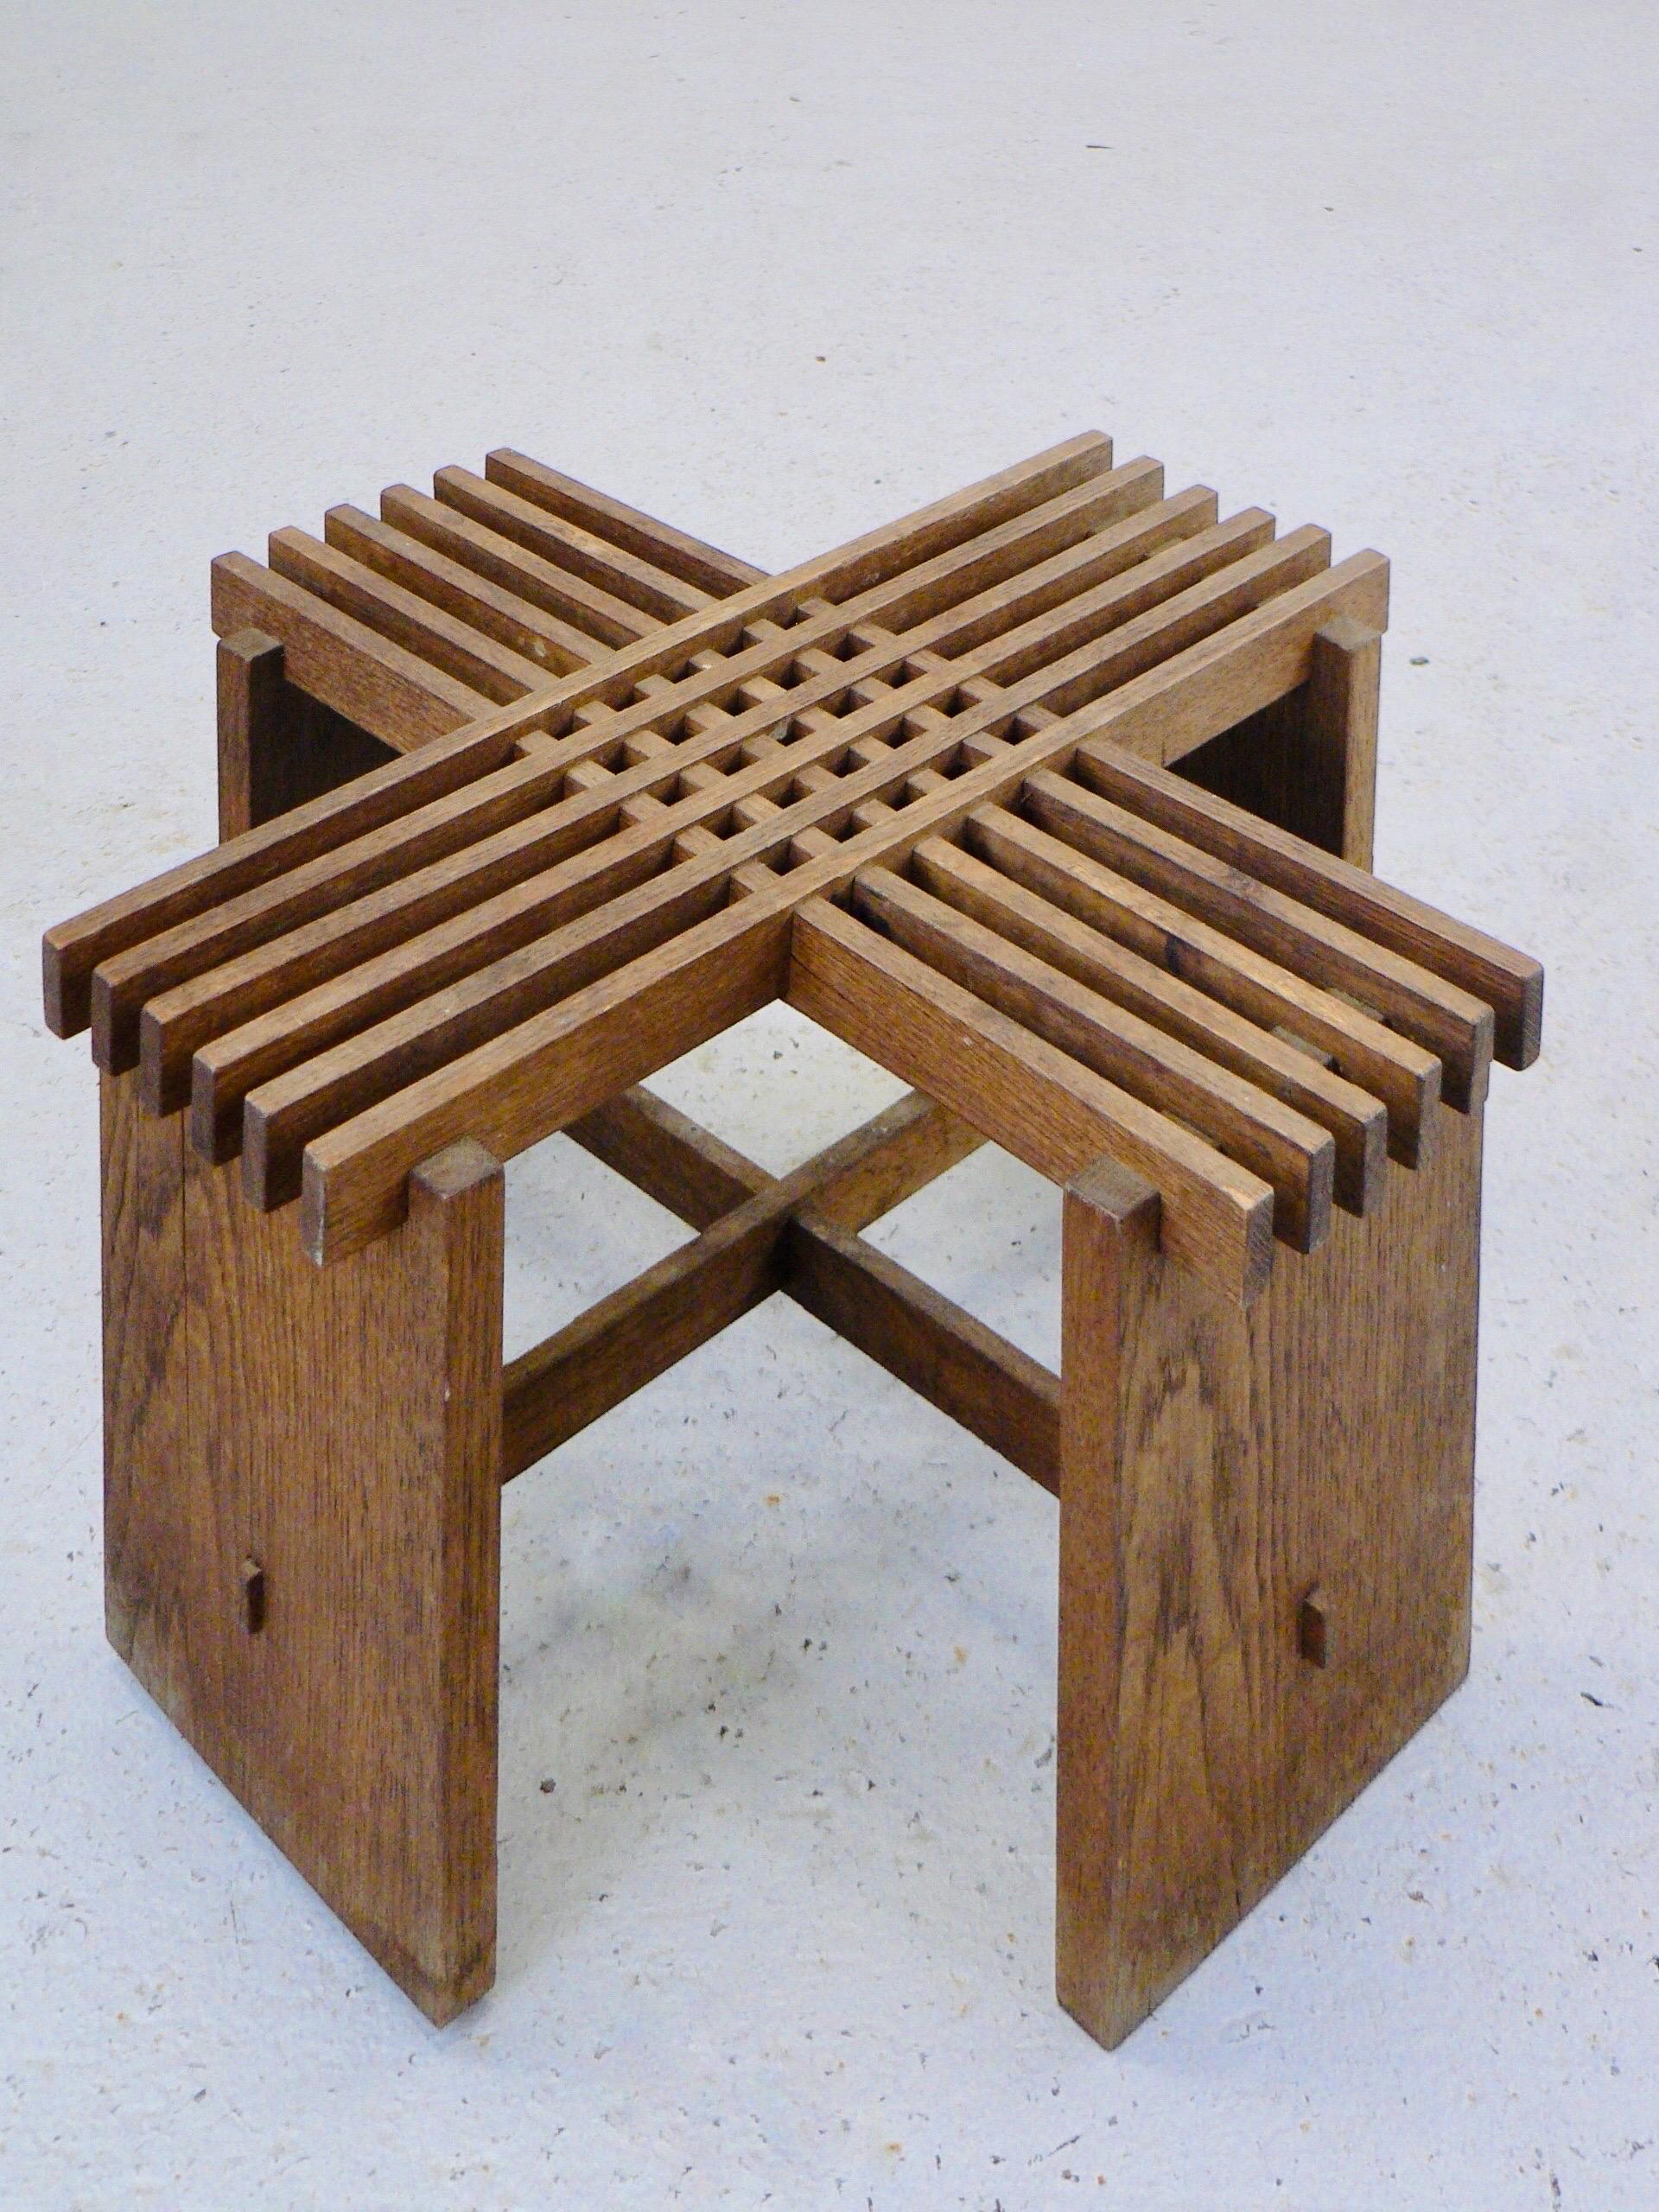 Mid-20th Century A solid oak stool or footrest - Art & crafts - 1930 - France. For Sale